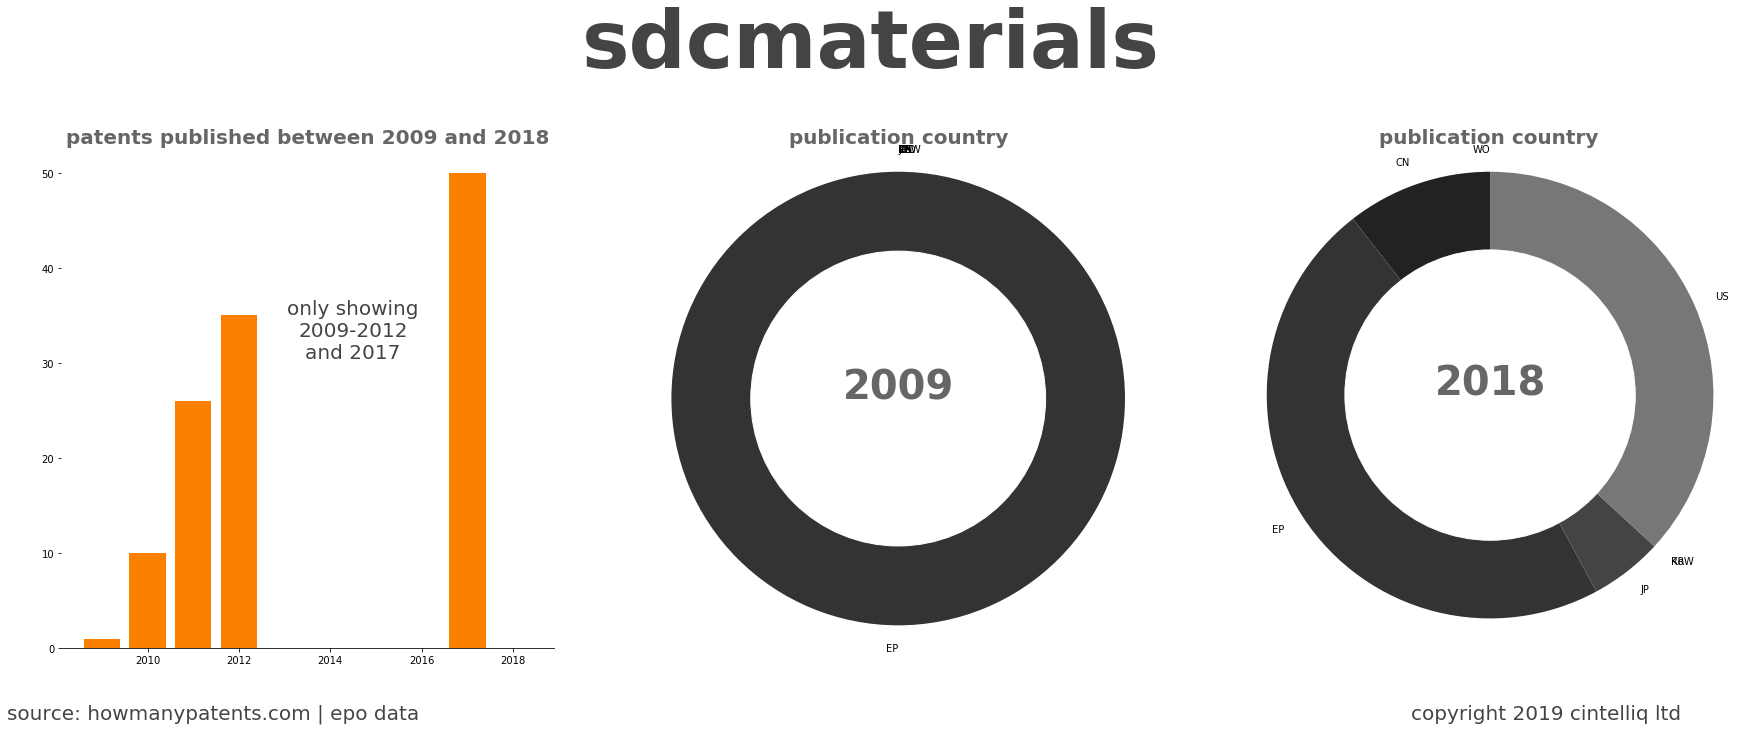 summary of patents for Sdcmaterials